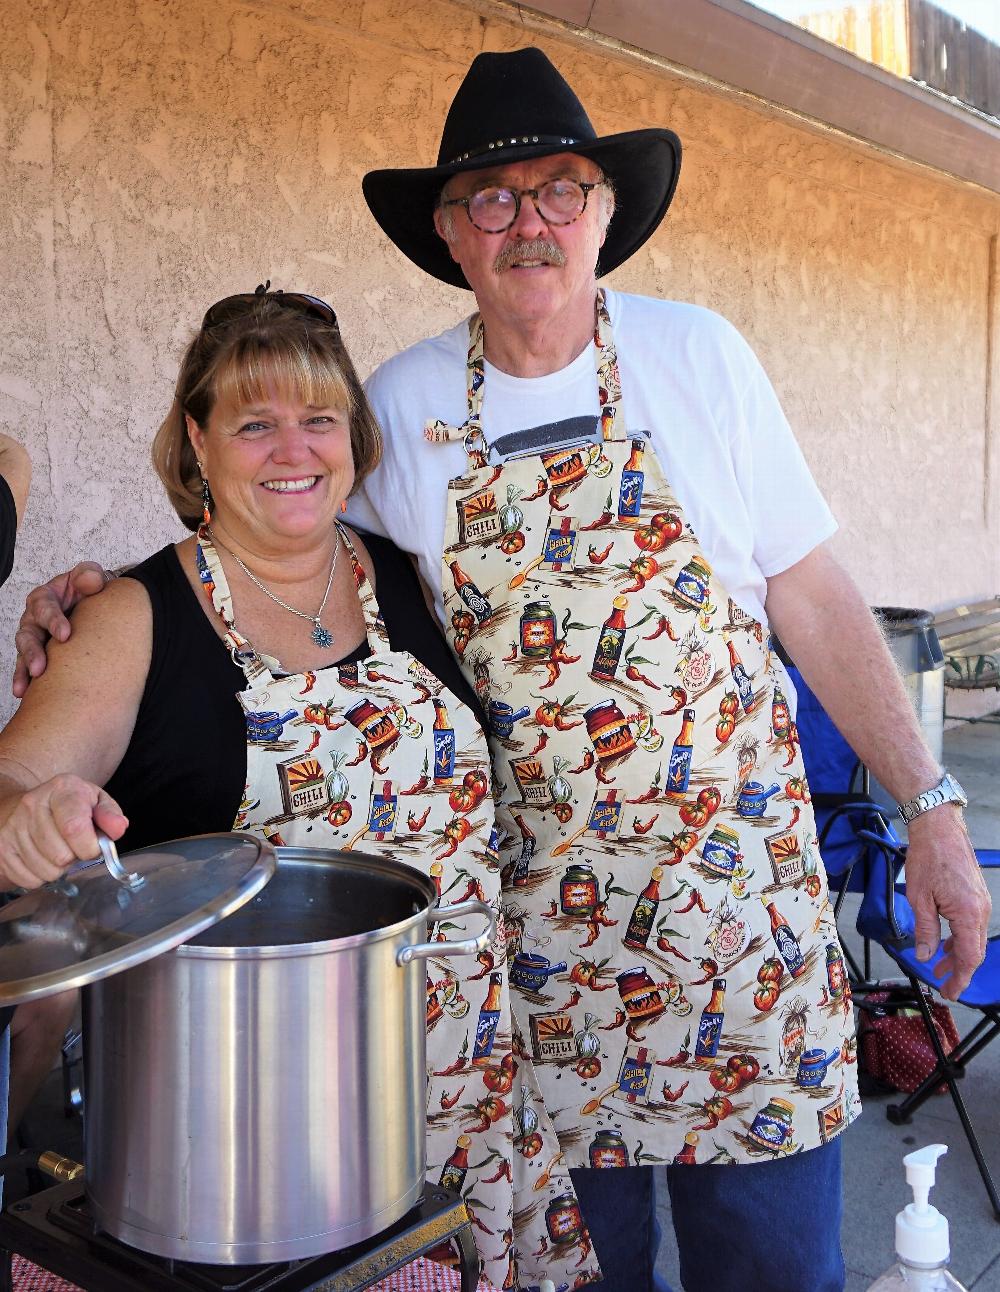 Leif and Friend at the 2017 Chili Cookoff